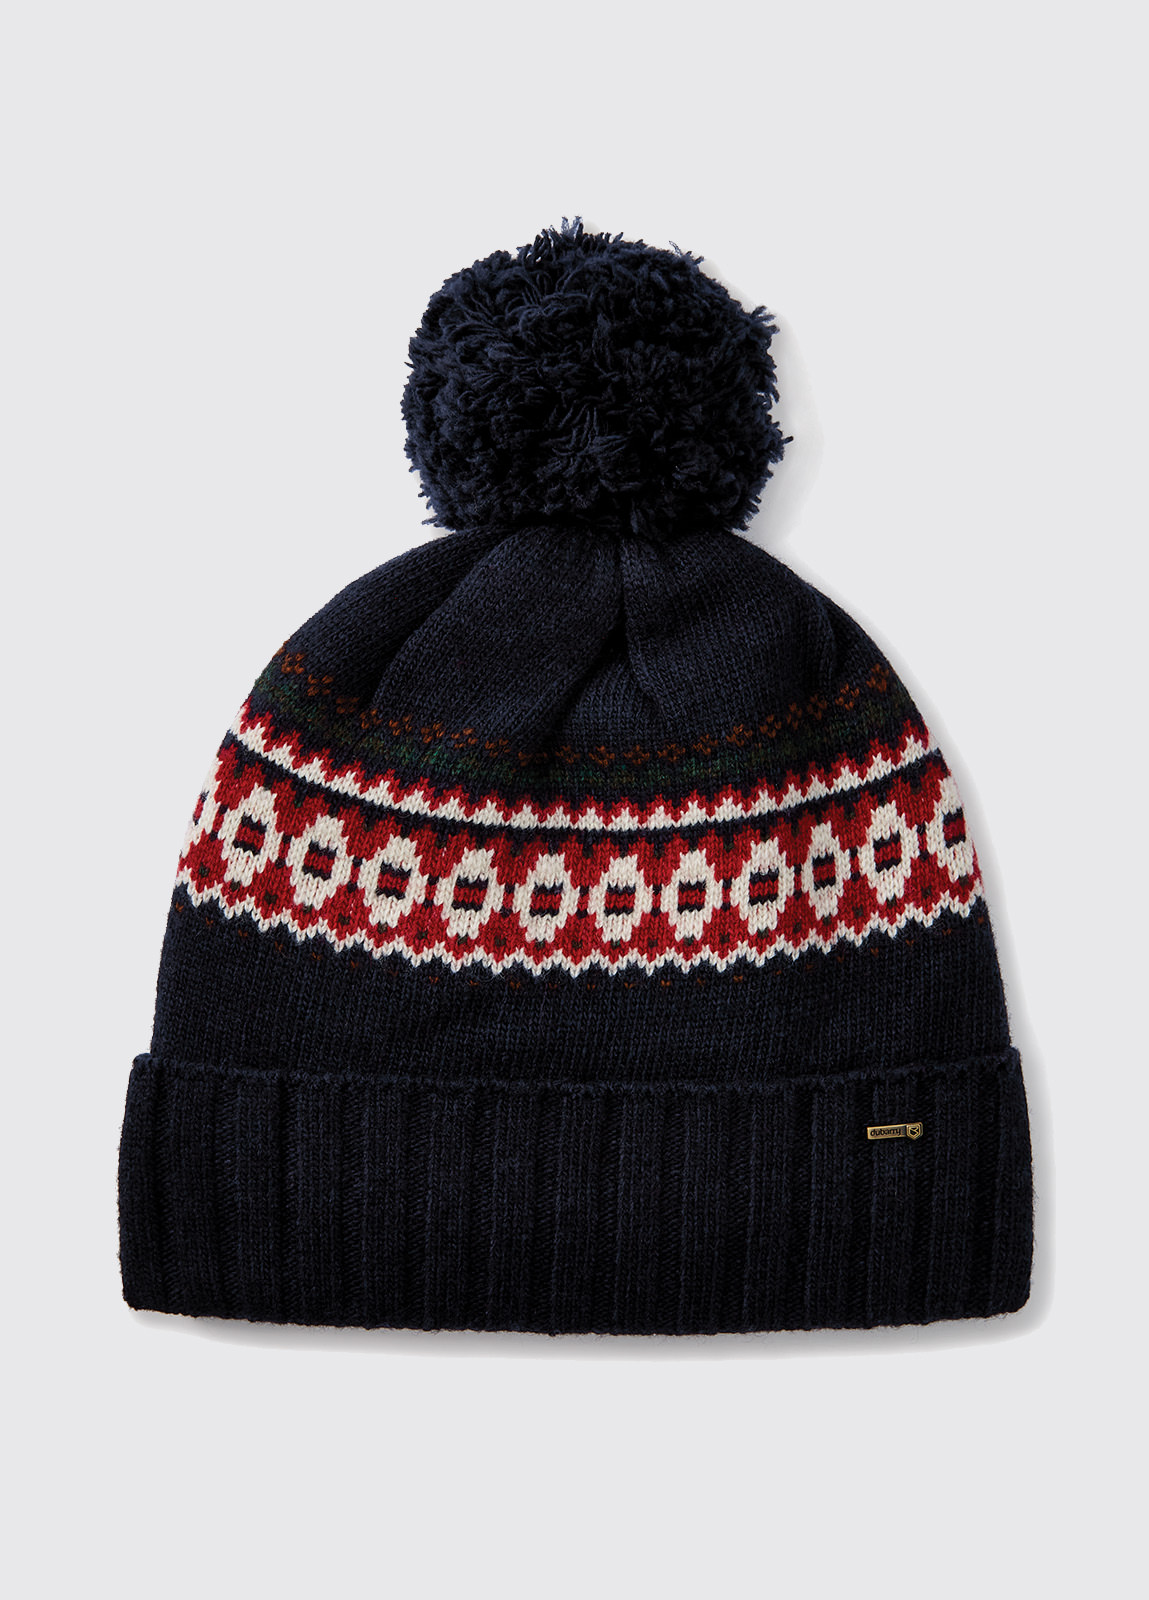 Kilcormac Knitted Hat - Navy